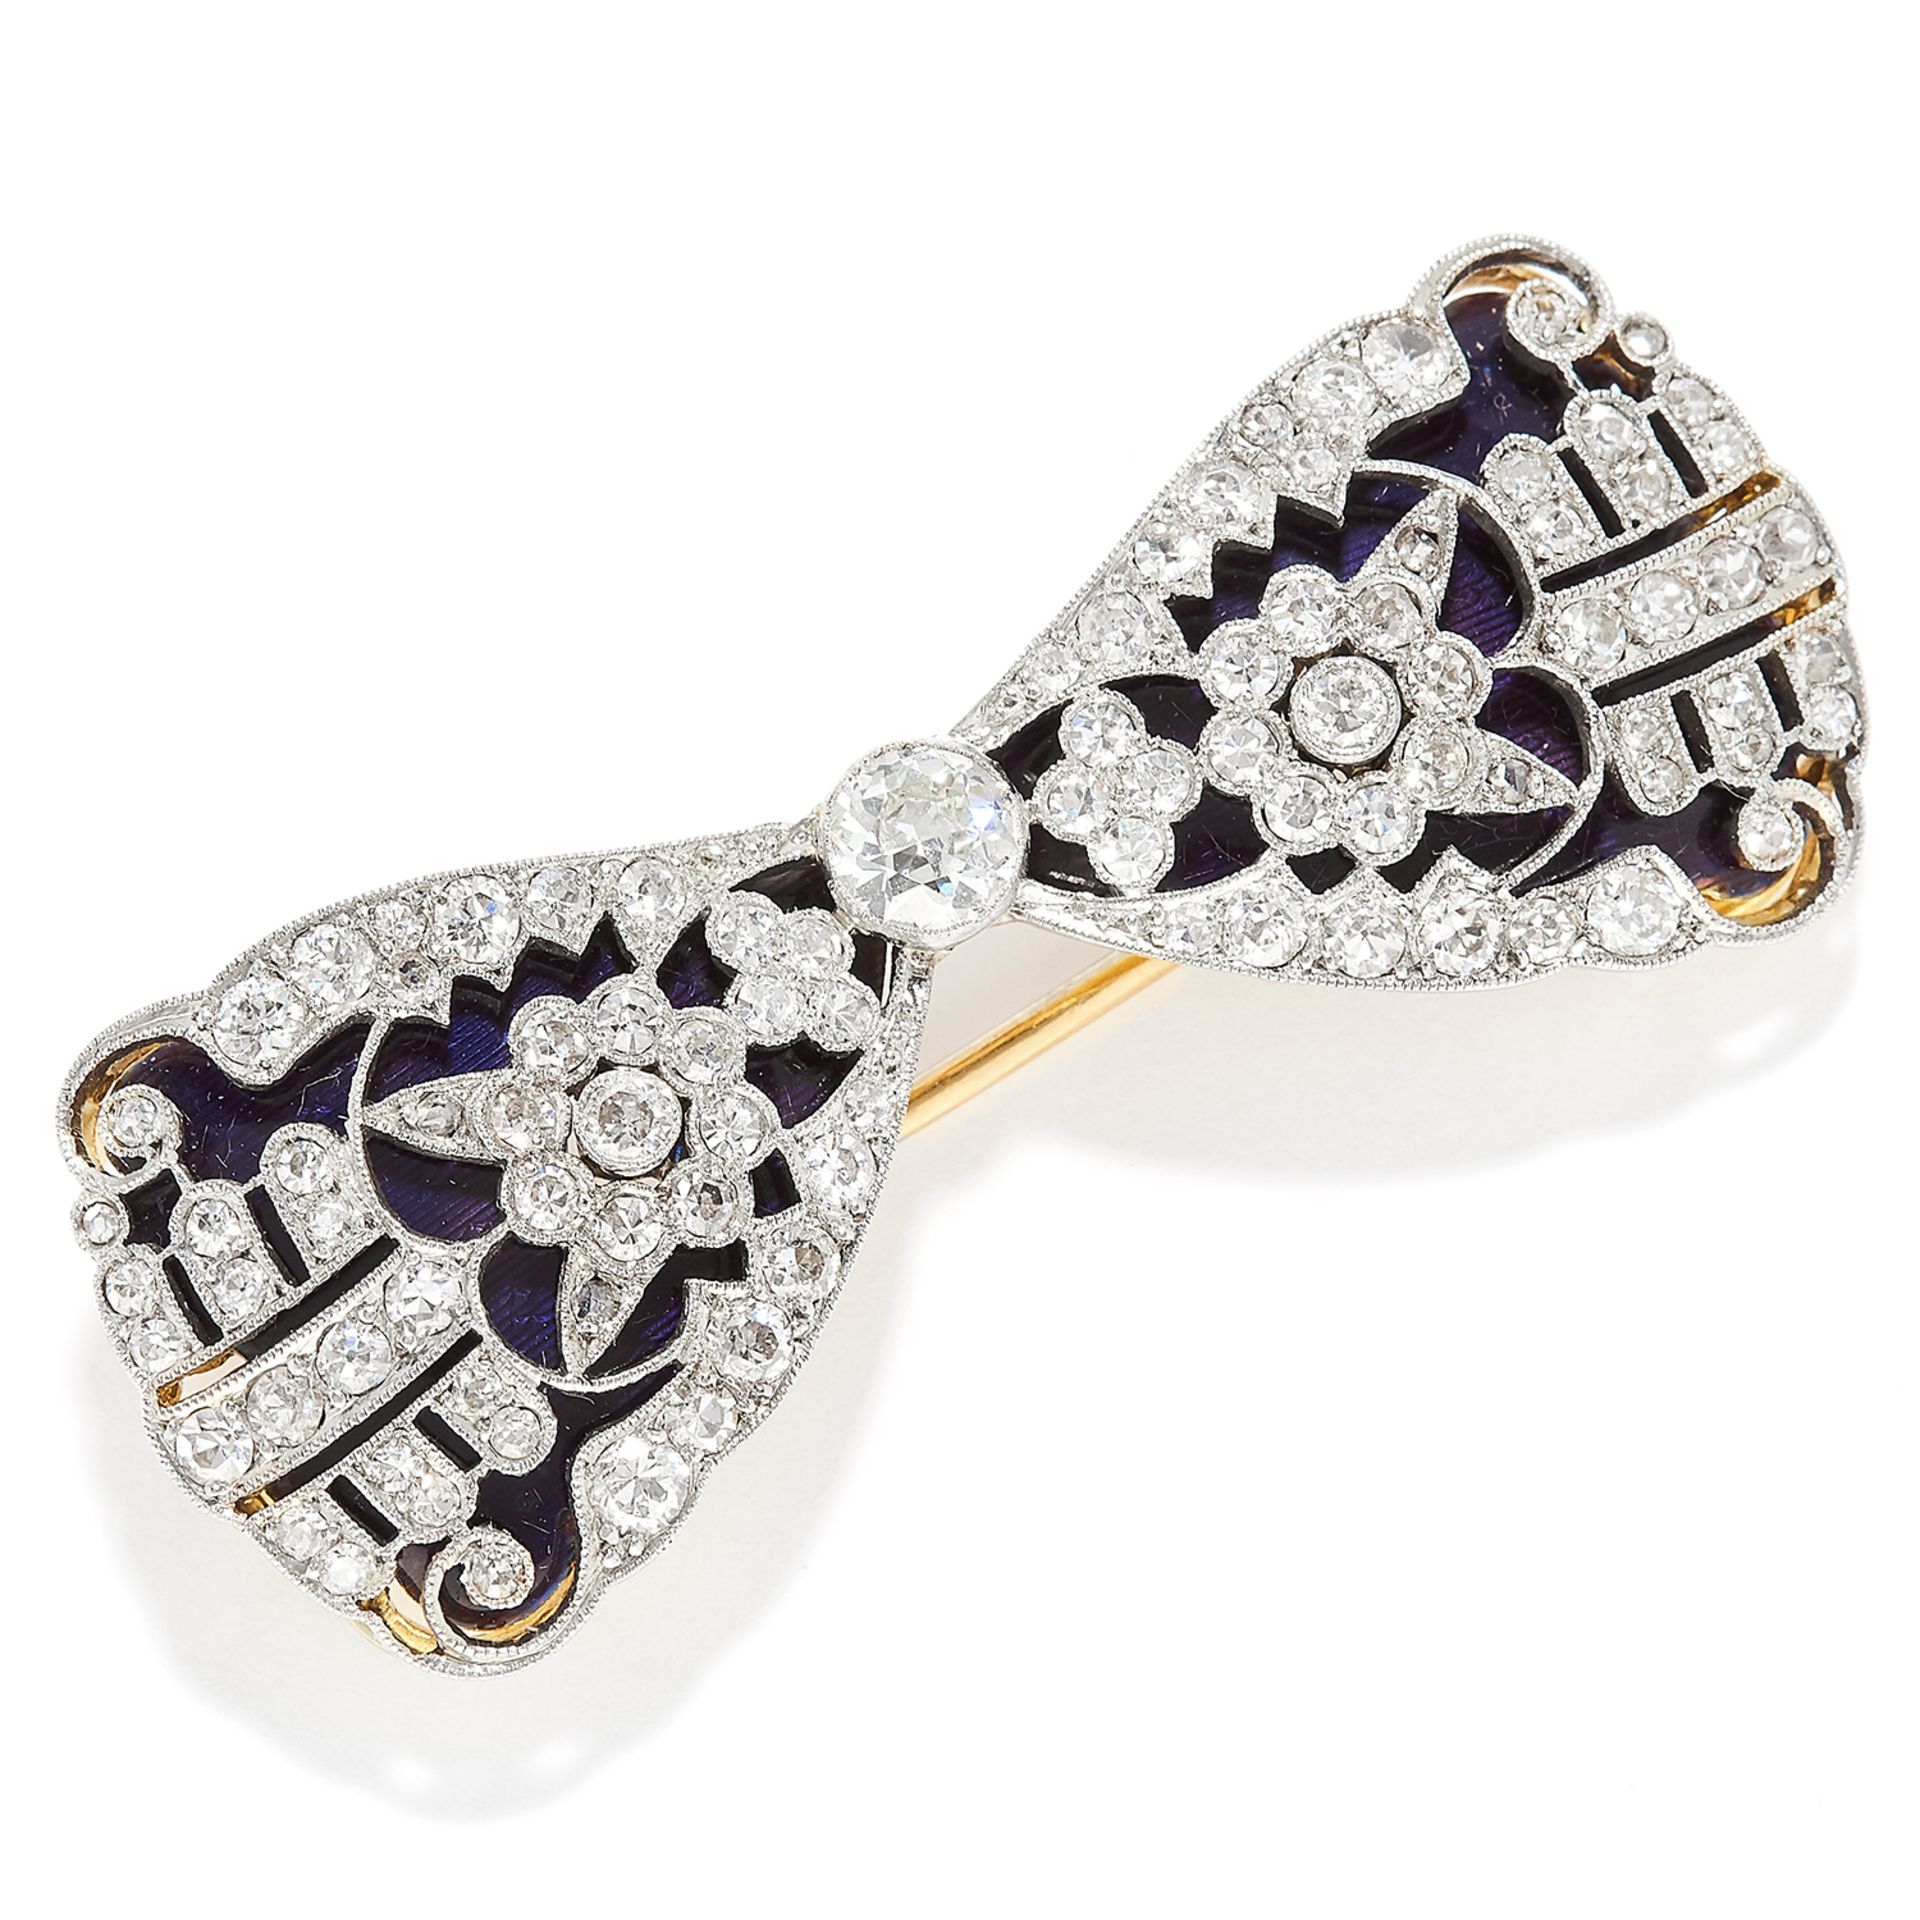 ANTIQUE DIAMOND AND ENAMEL BOW BROOCH / PENDANT in yellow gold and platinum, depicting a bow set